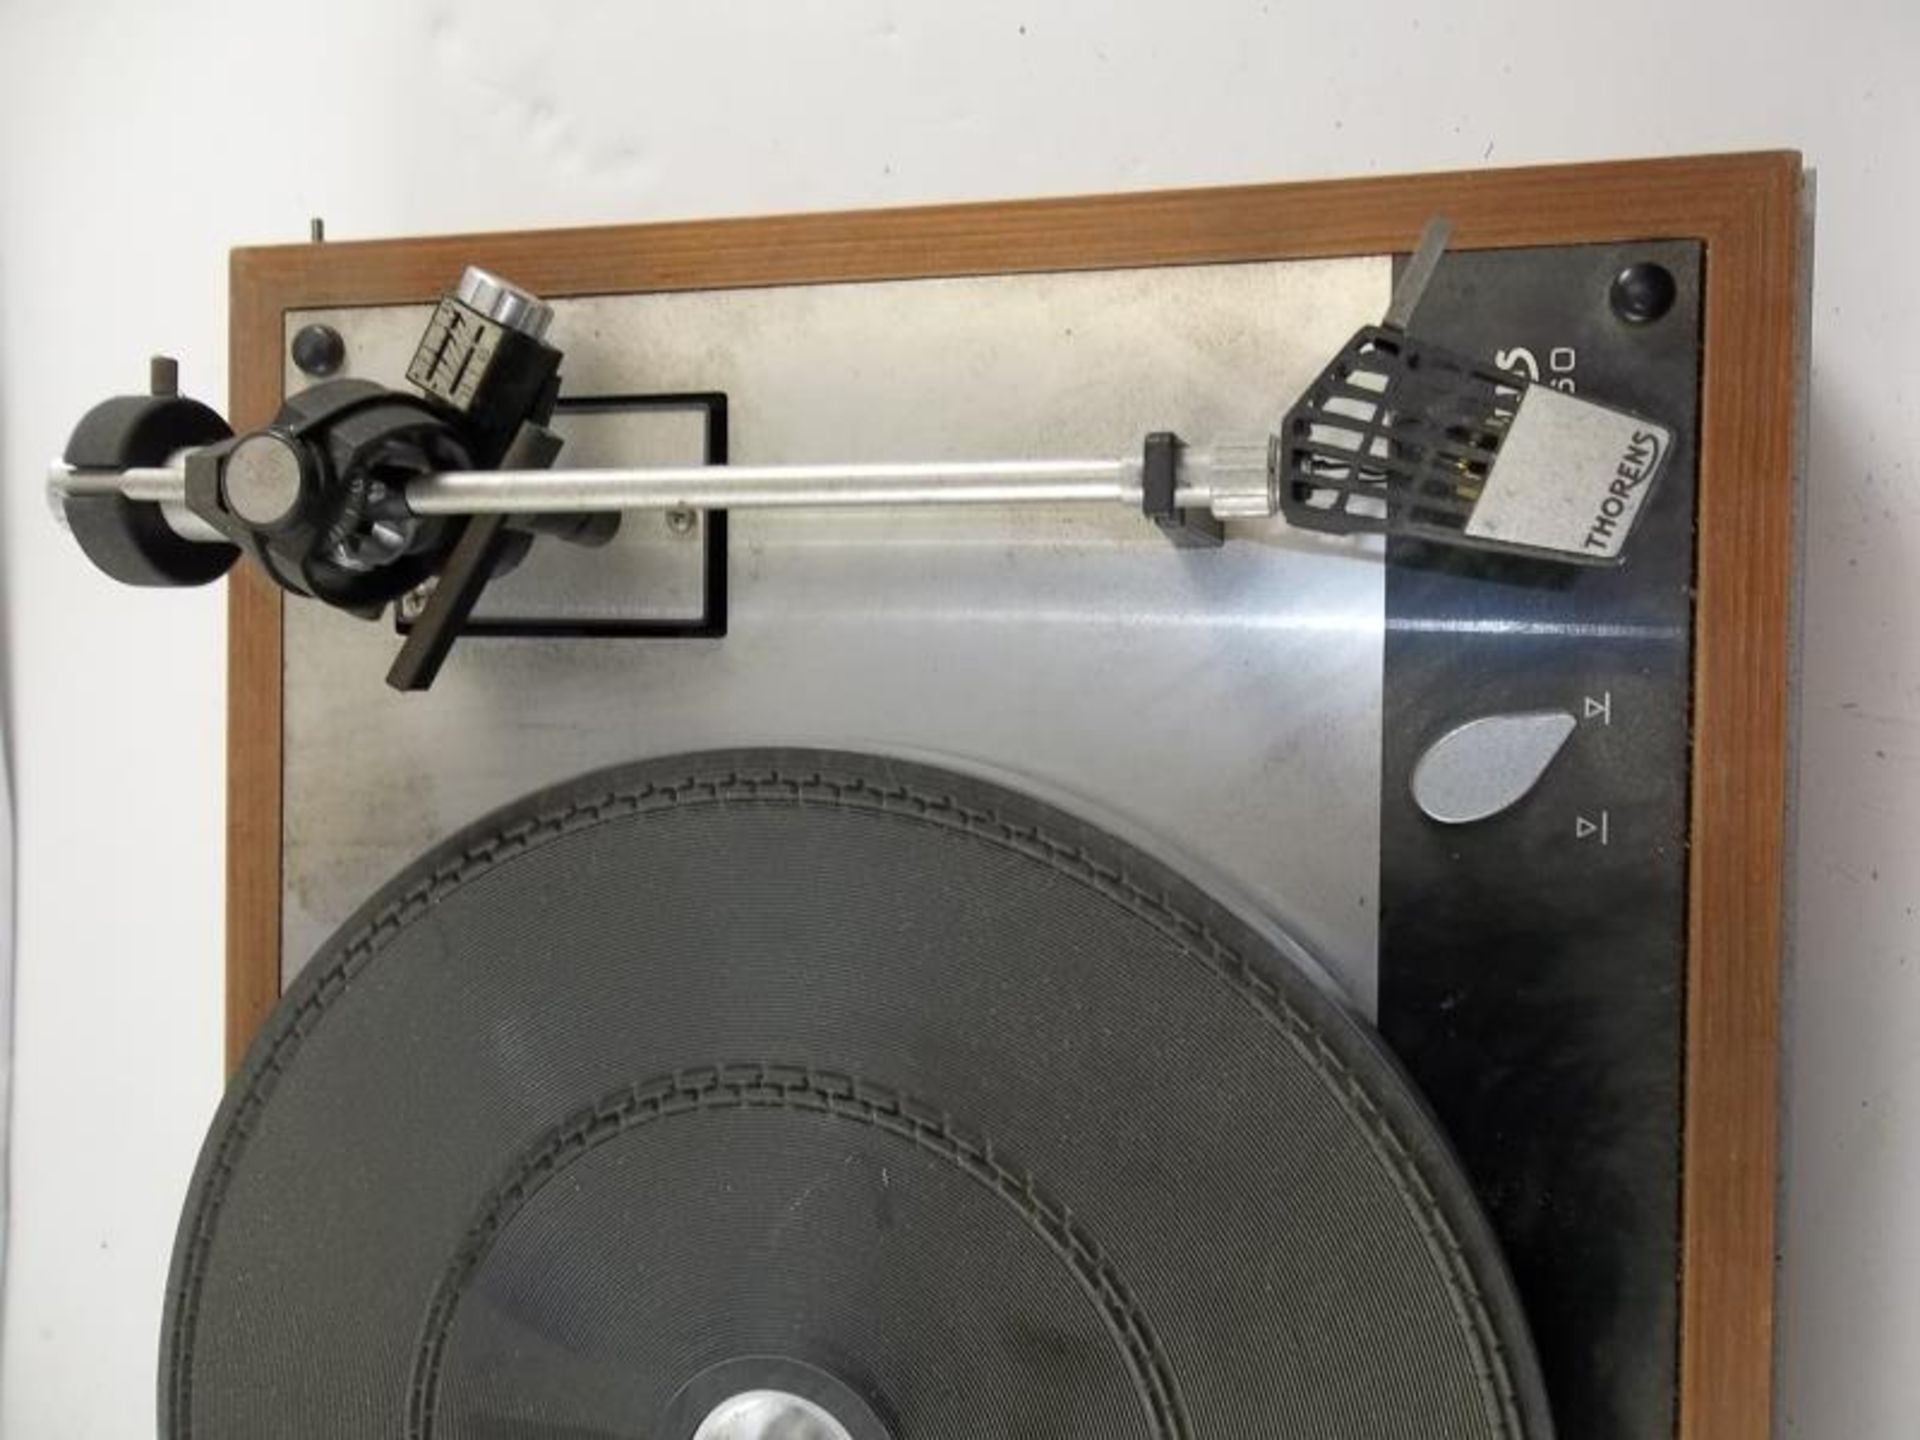 Thorens TD-160 turntable with a Thorens arm, #095462, 33, 45 - Image 2 of 6